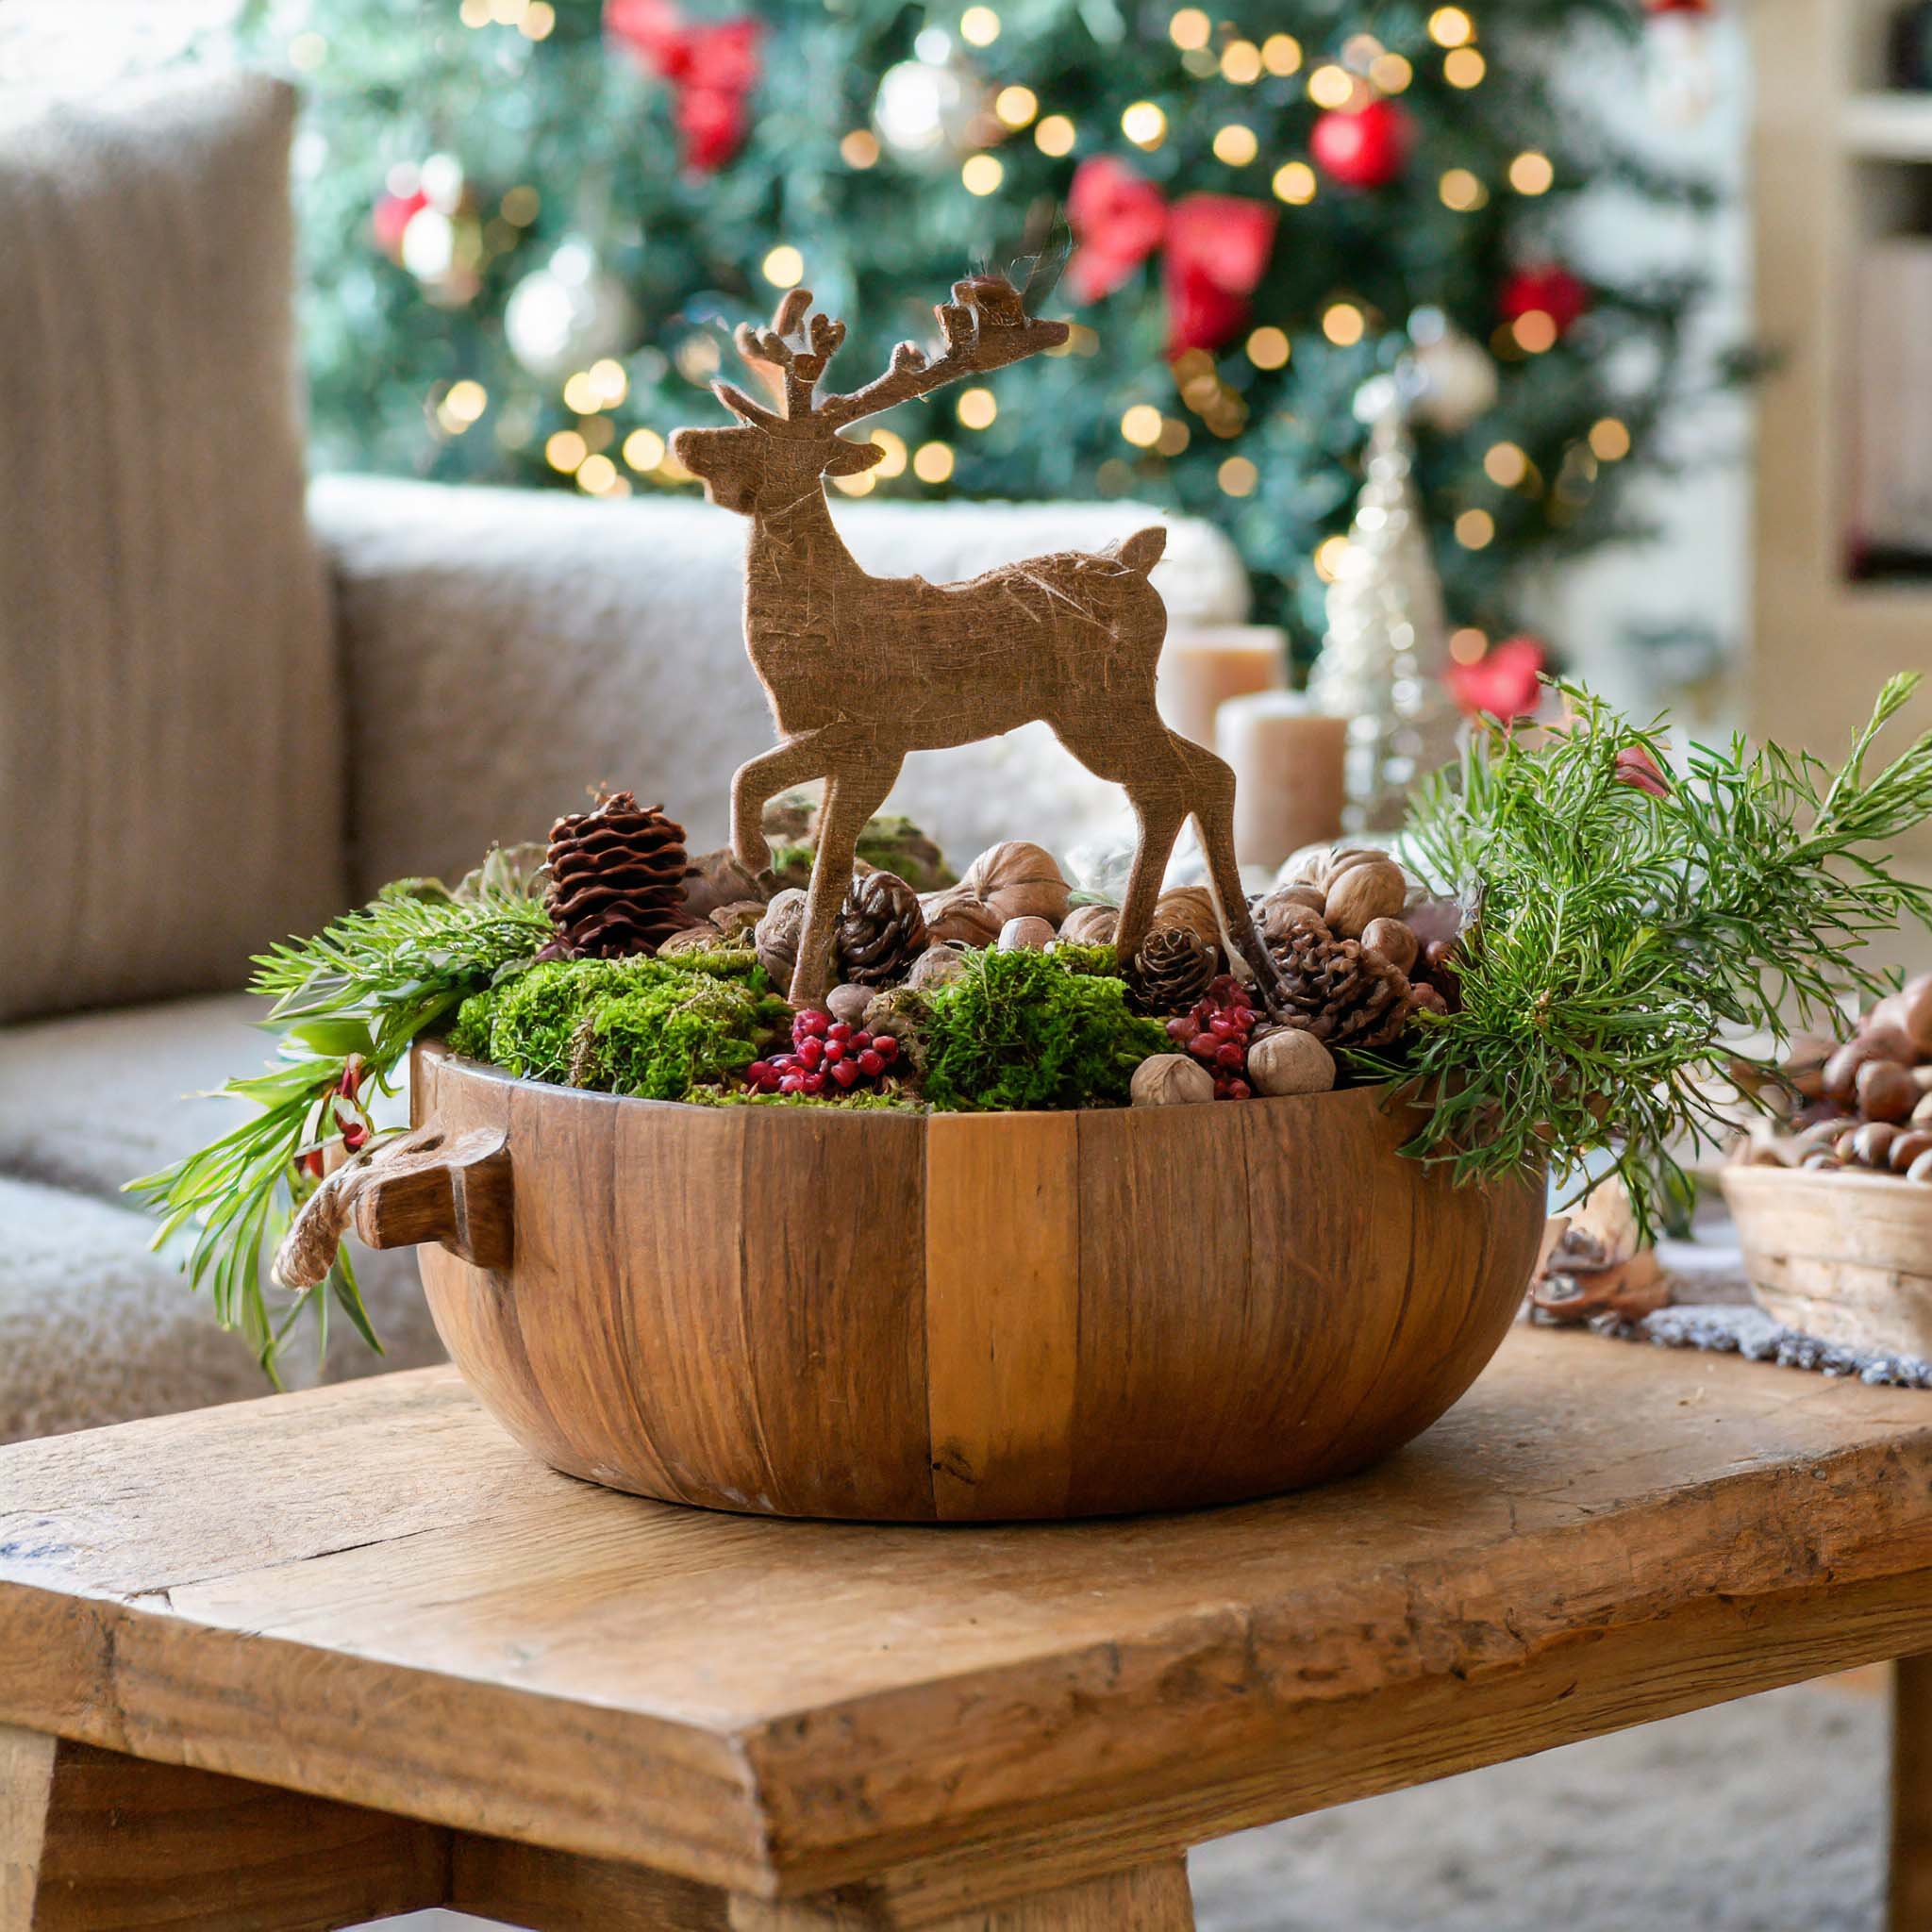 Wooden dough bowl filled with pine cones, a reindeer, moss, walnuts, and berry sprays.